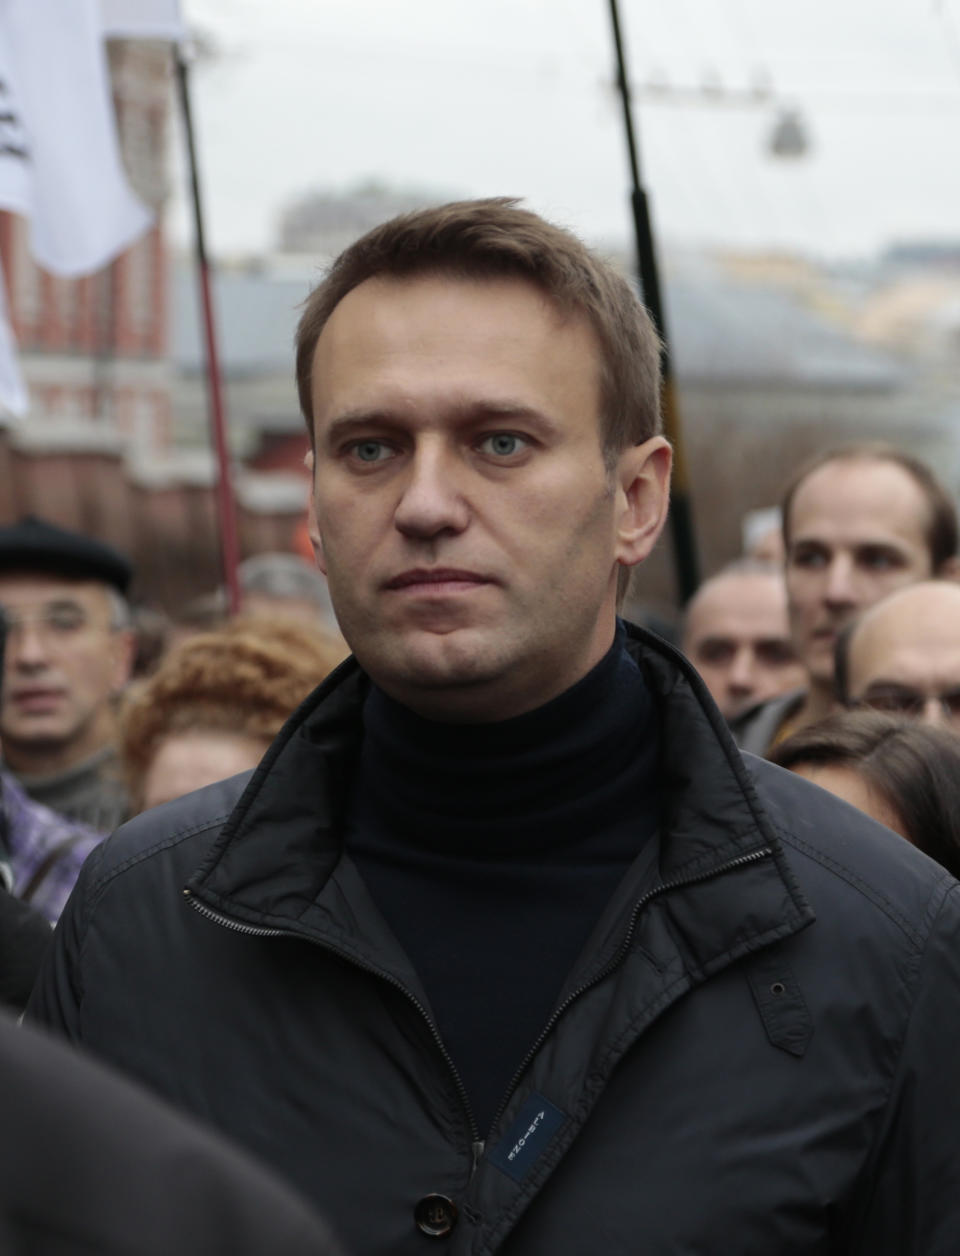 FILE - In this Sunday, Oct. 27, 2013 file photo Russian opposition leader Alexei Navalny takes part in an opposition rally in downtown Moscow. Russia’s anti-corruption campaigner Navalny on Monday, Jan. 27, 2014, launched a website to publish a wide range of data pointing to corruption in Sochi. Russia has spent about $51 billion to deliver the Winter Olympics in Sochi, which run Feb. 7-23. (AP Photo/Ivan Sekretarev, File)